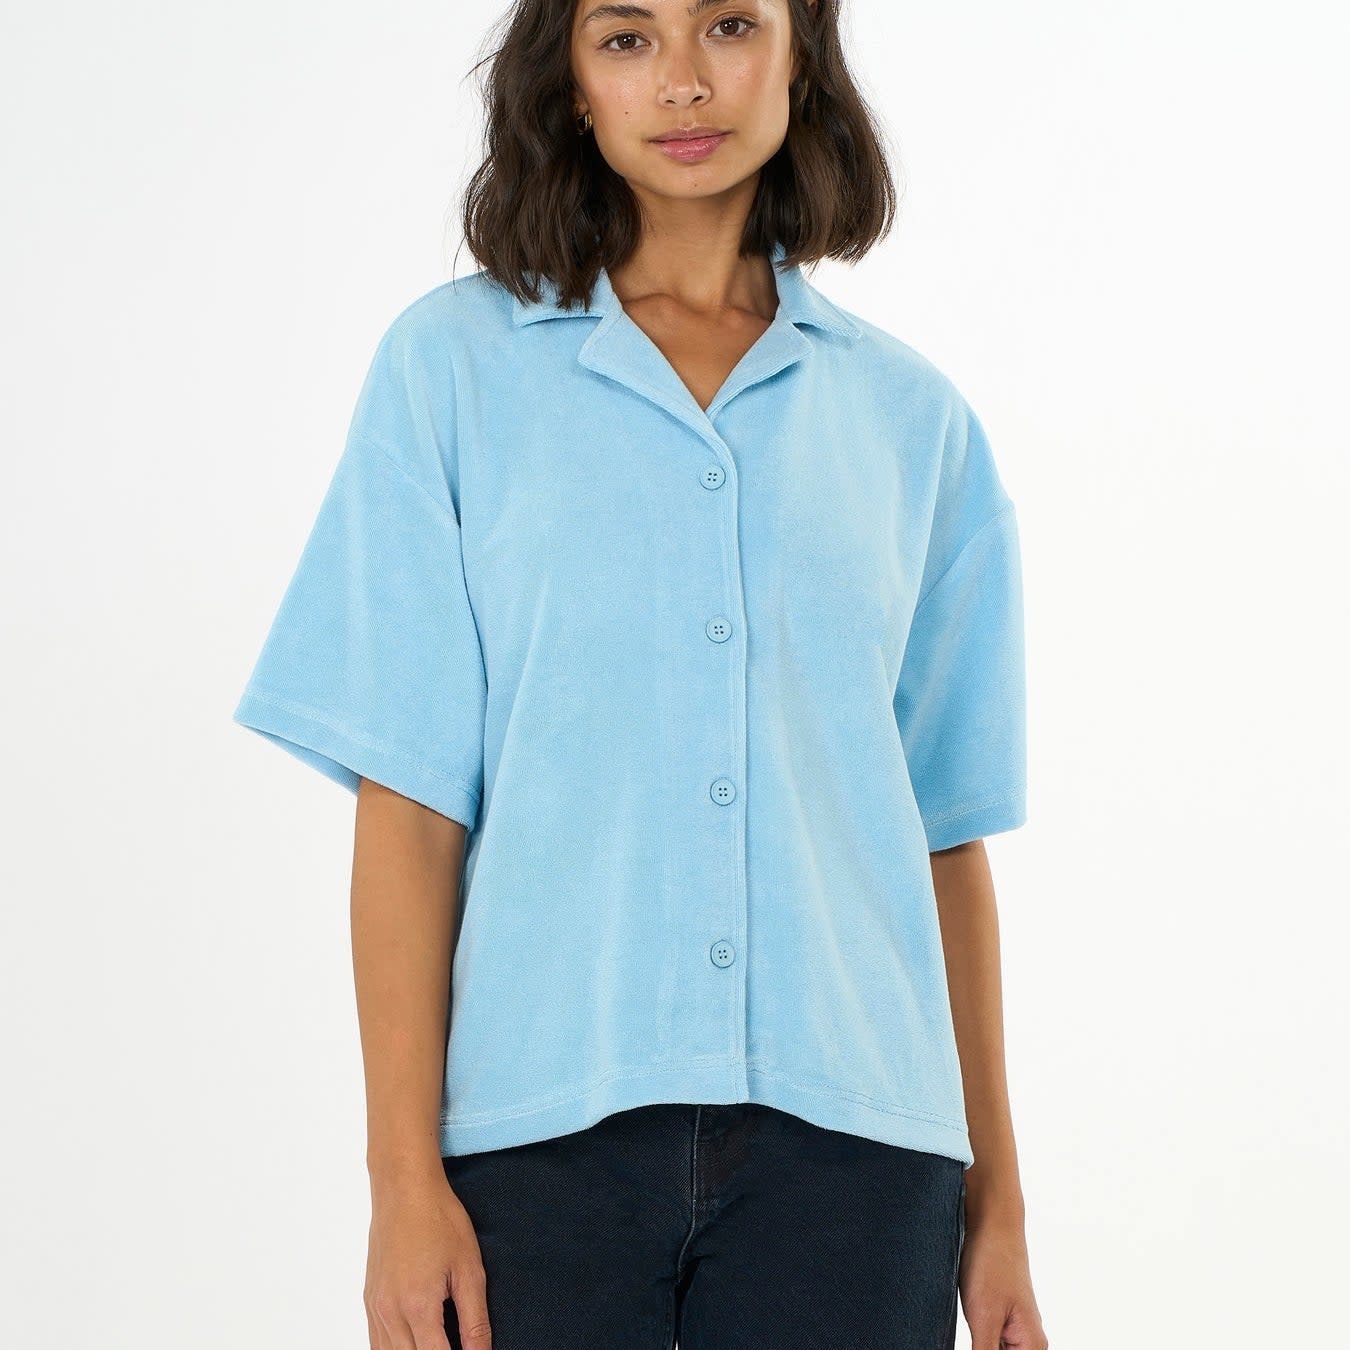 KnowledgeCotton Apparel KnowledgeCotton, Terry Shirt, airy blue, S